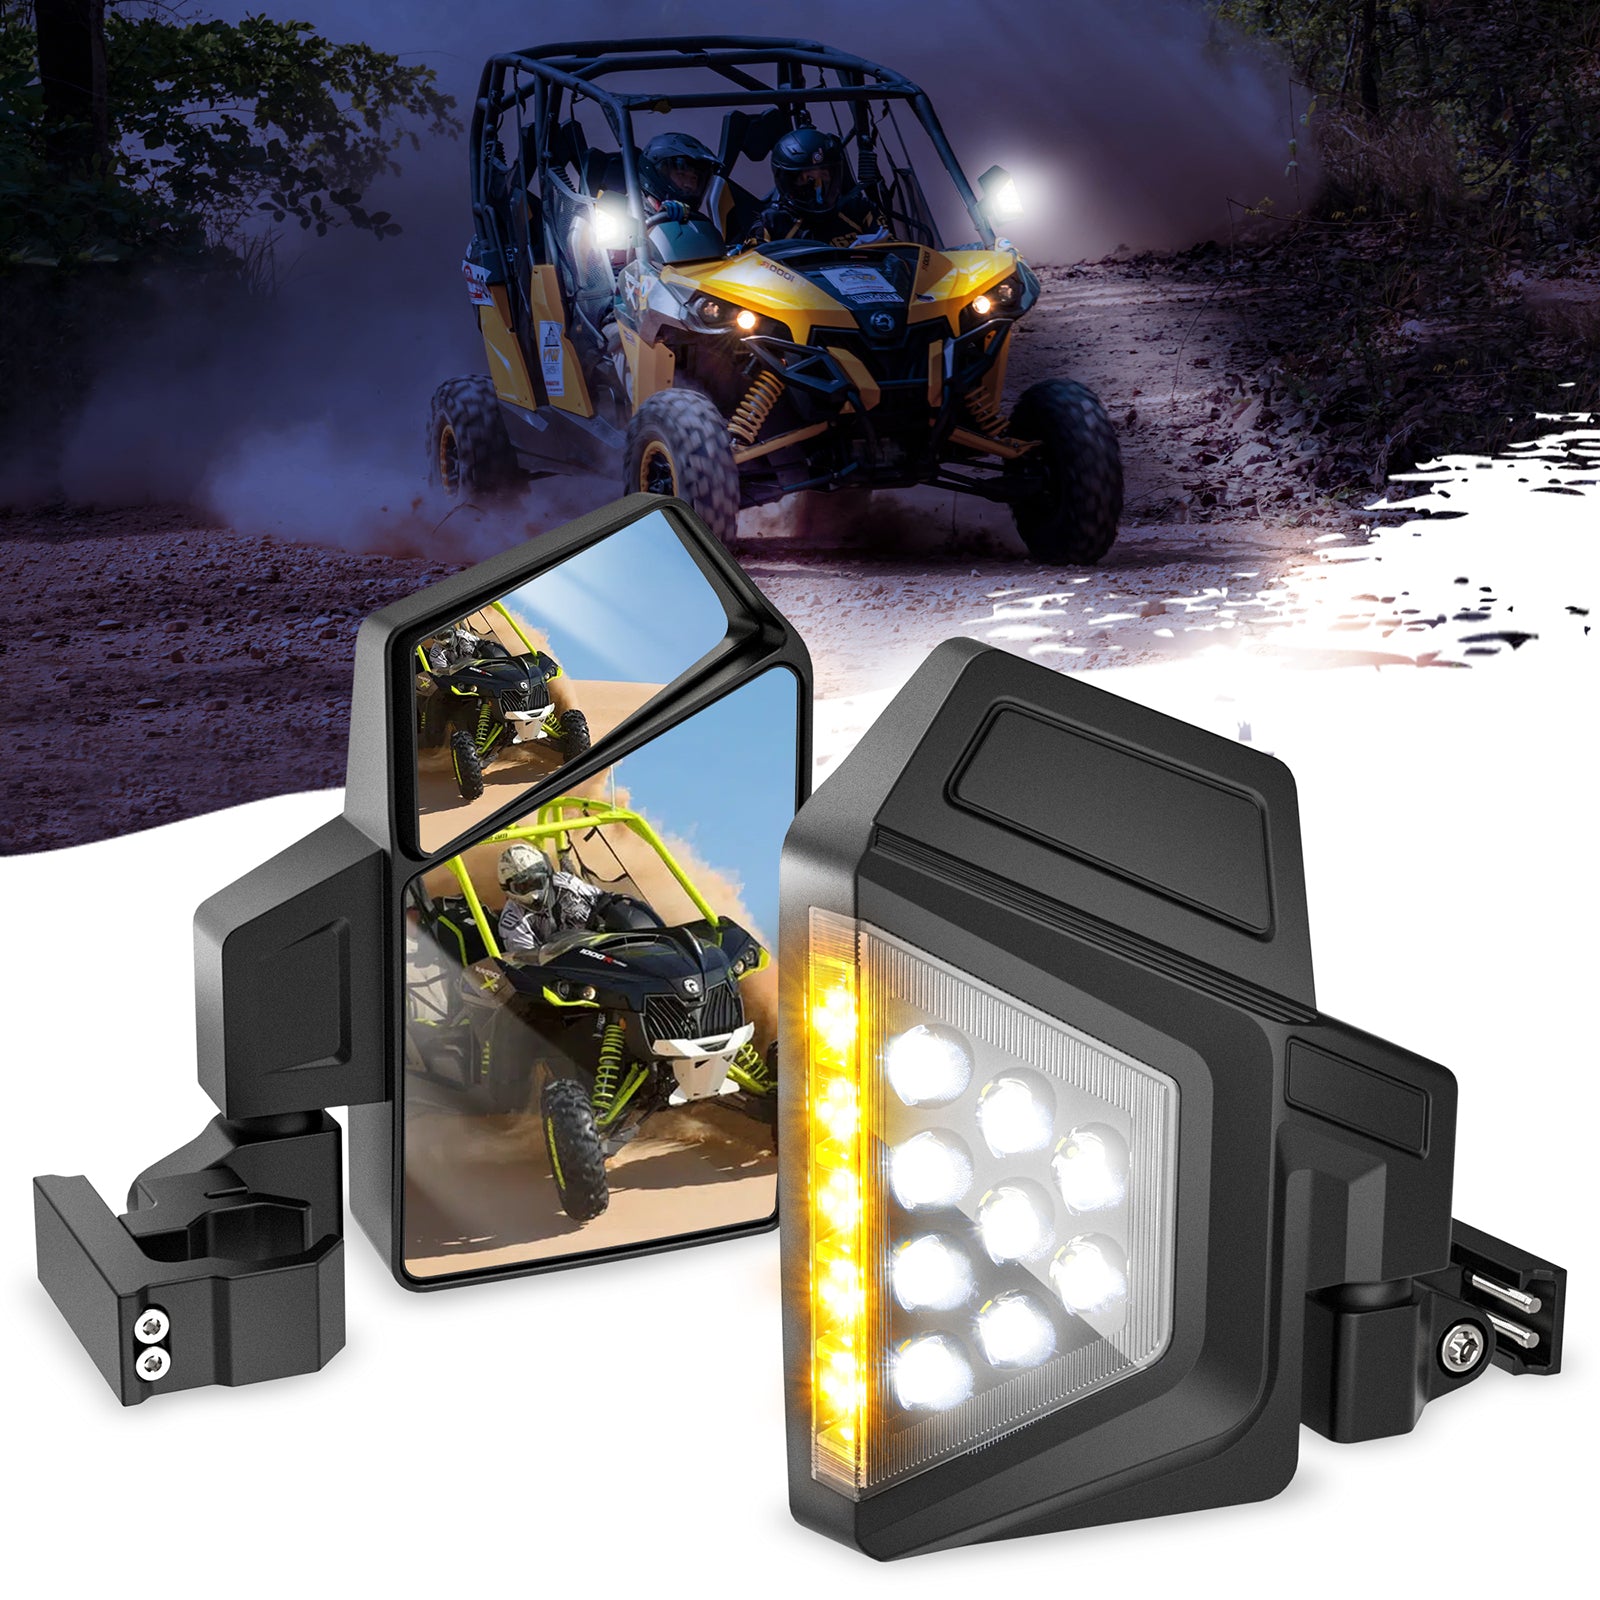 UTV RZR Side Rear View Mirrors with 51W LED Lights, Fit All 1.5 -1.75 Inch Roll Bar Cage